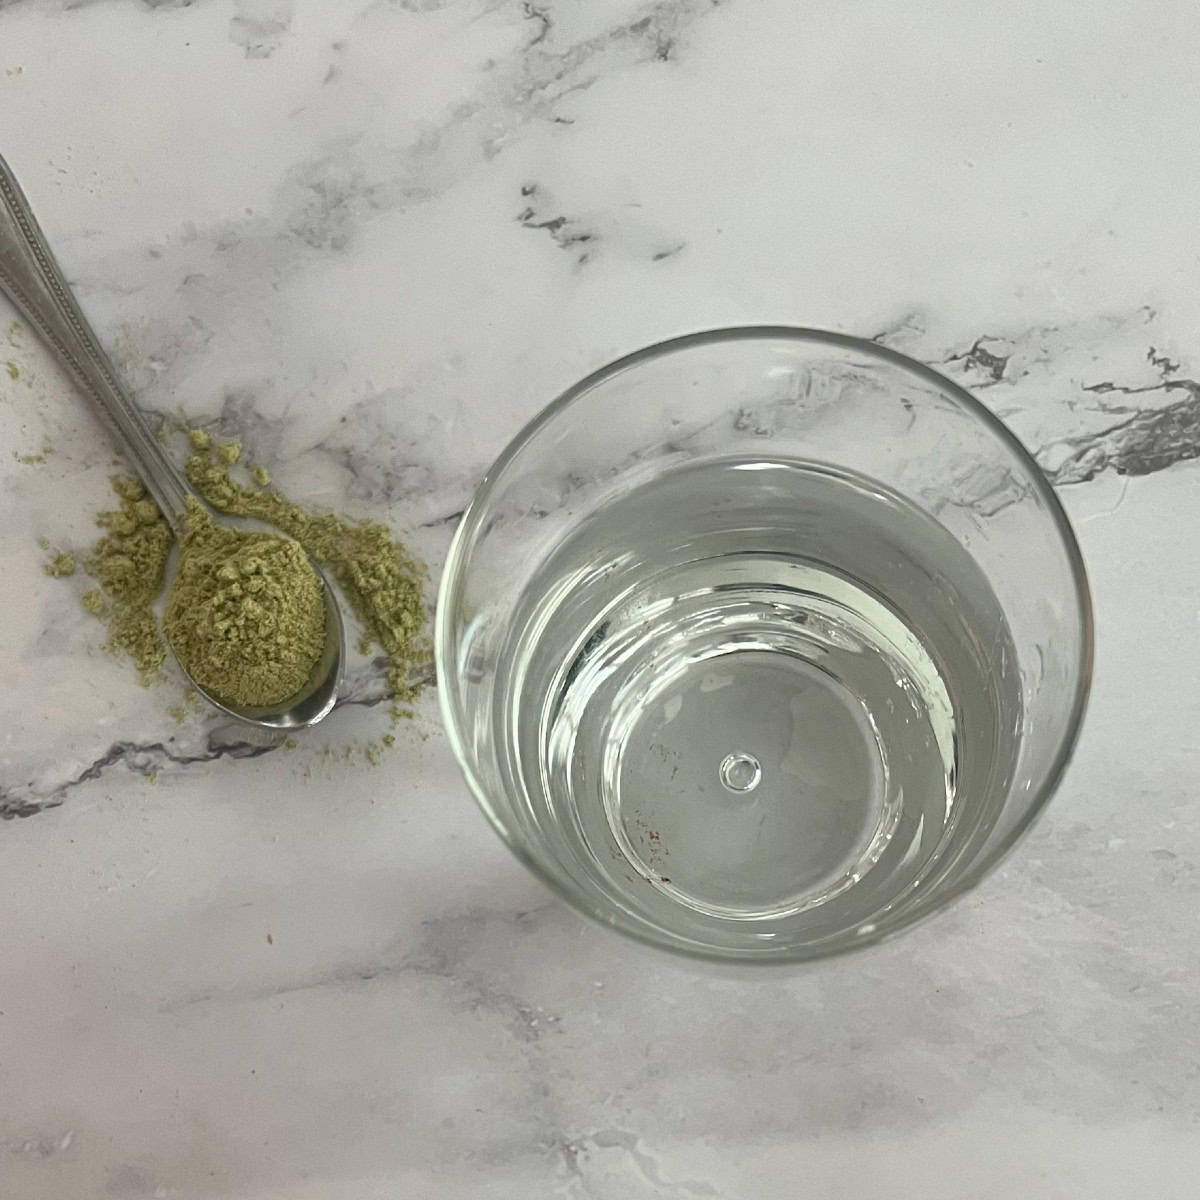 a cup filled with water with green matcha latte powder next to it on a spoon. 